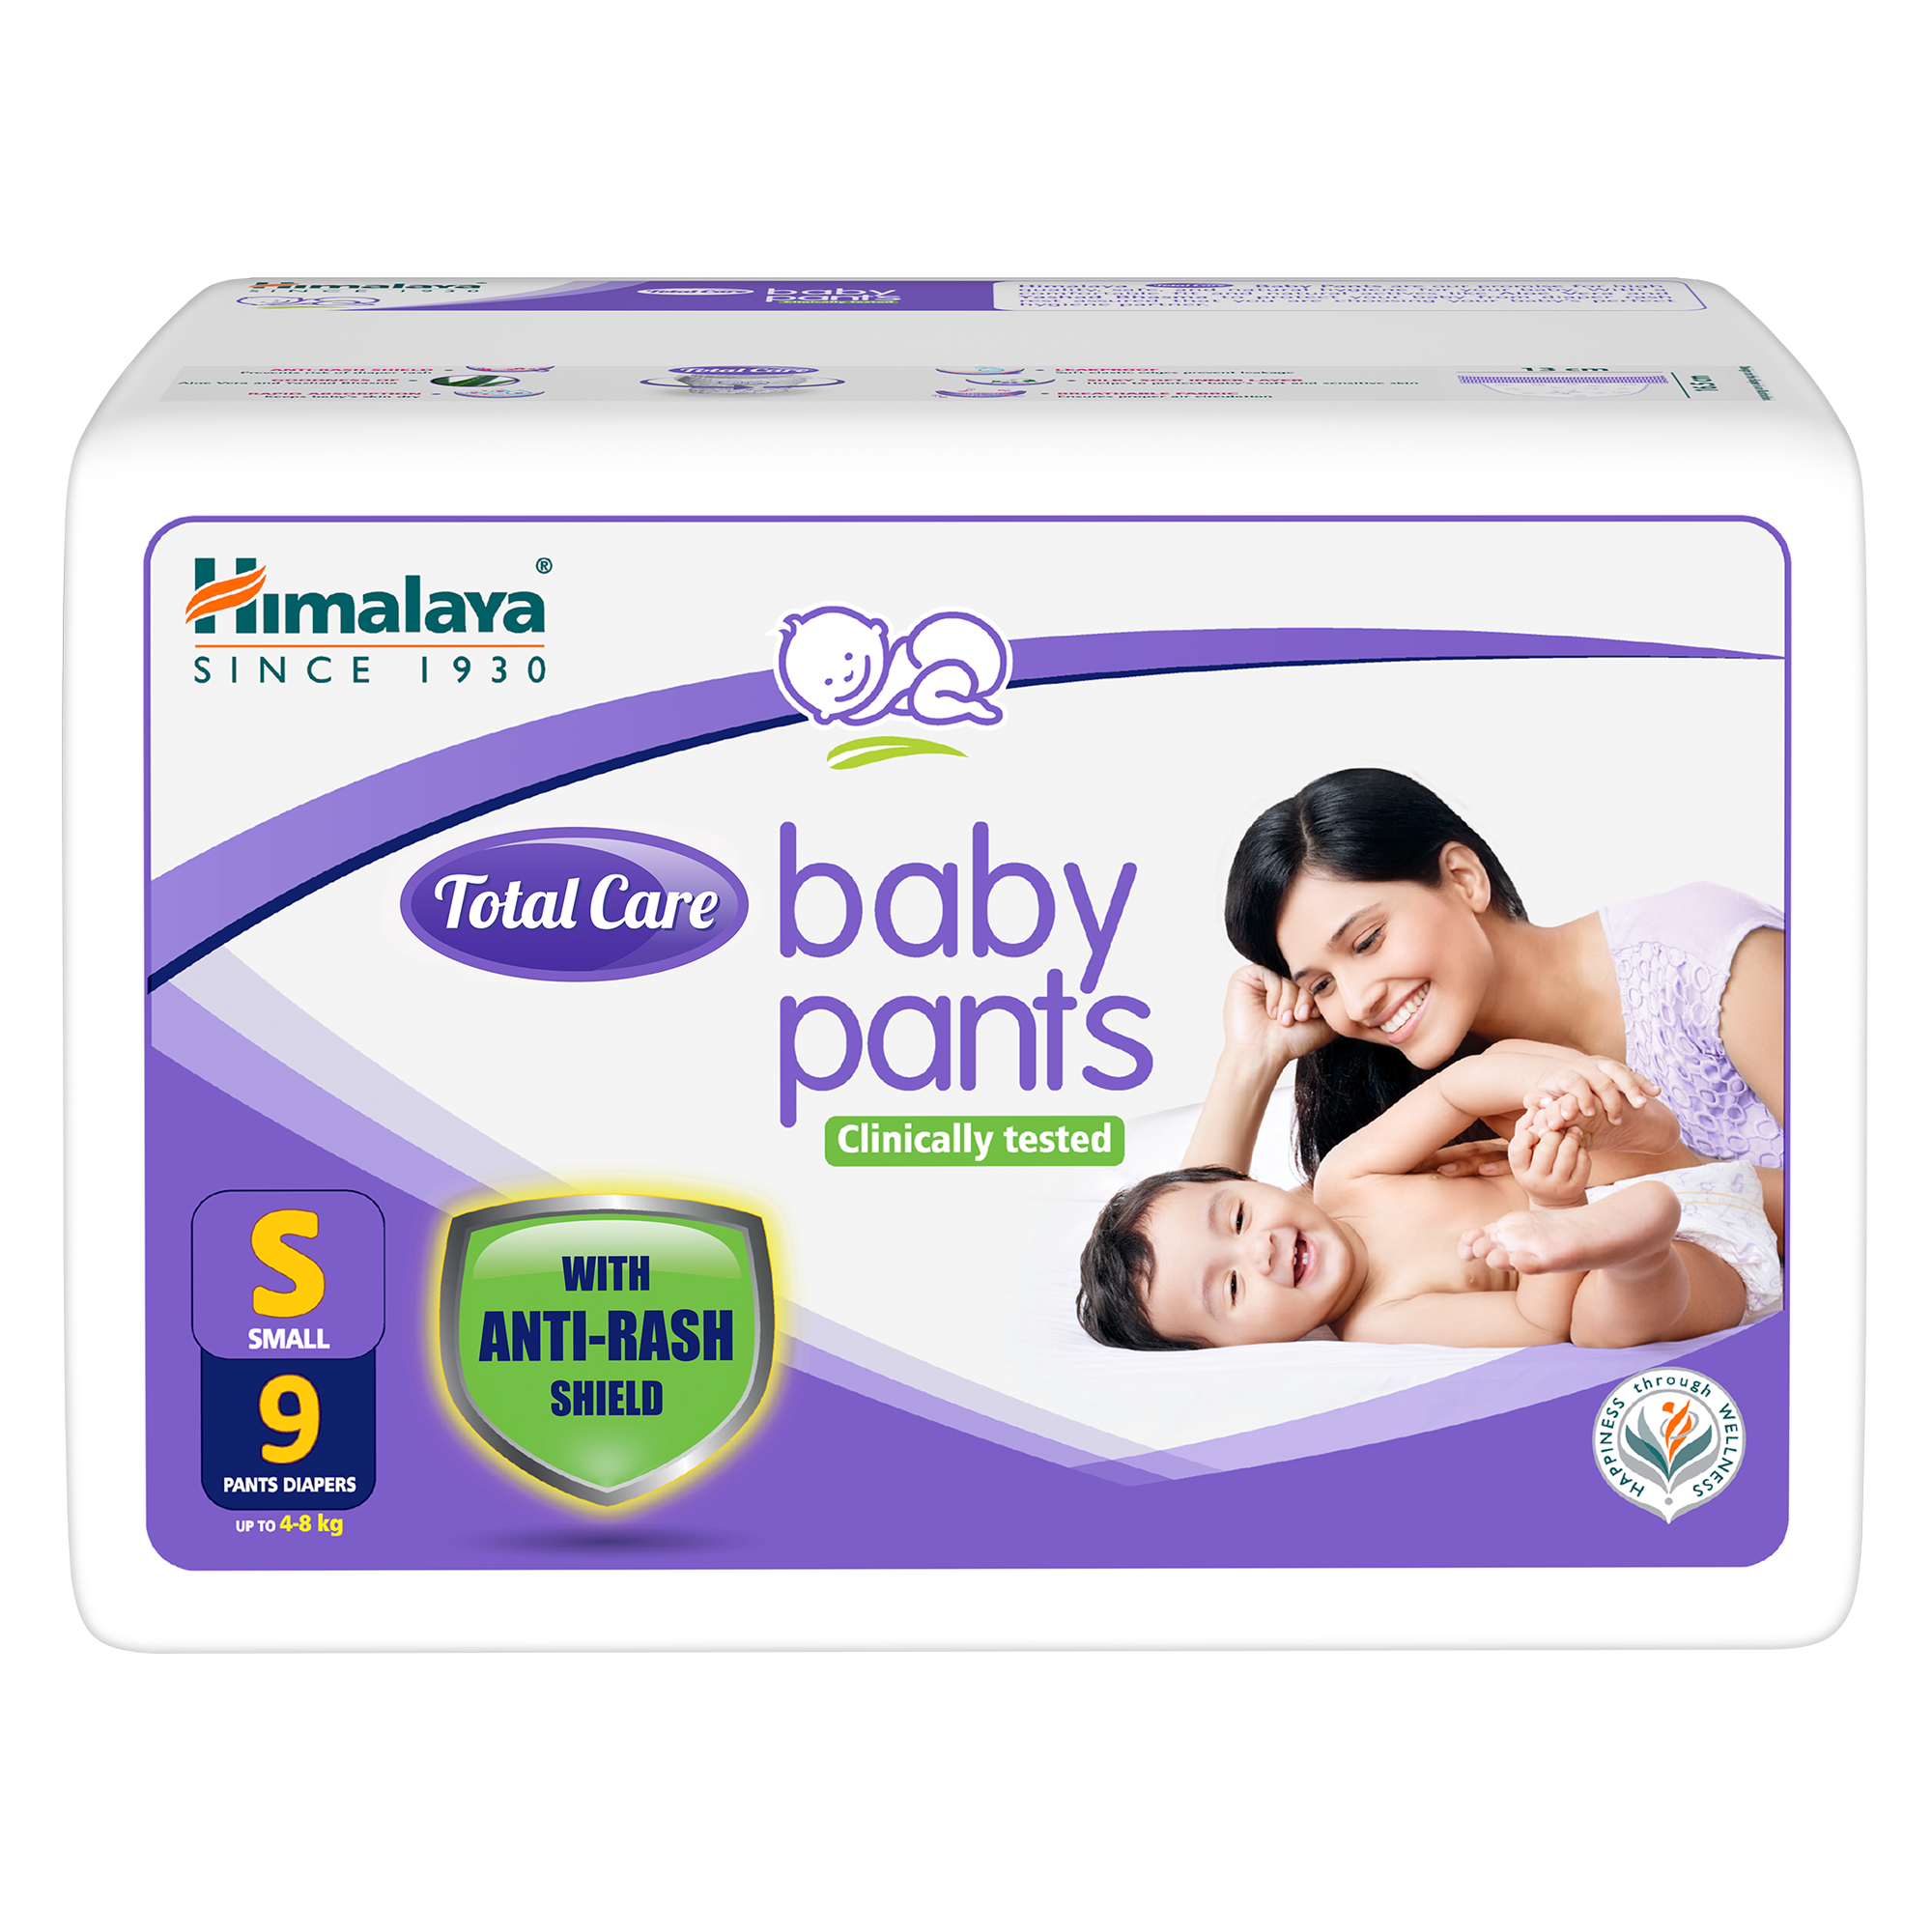 Himalaya Soothing Baby Wipes Buy packet of 72 wipes at best price in India   1mg